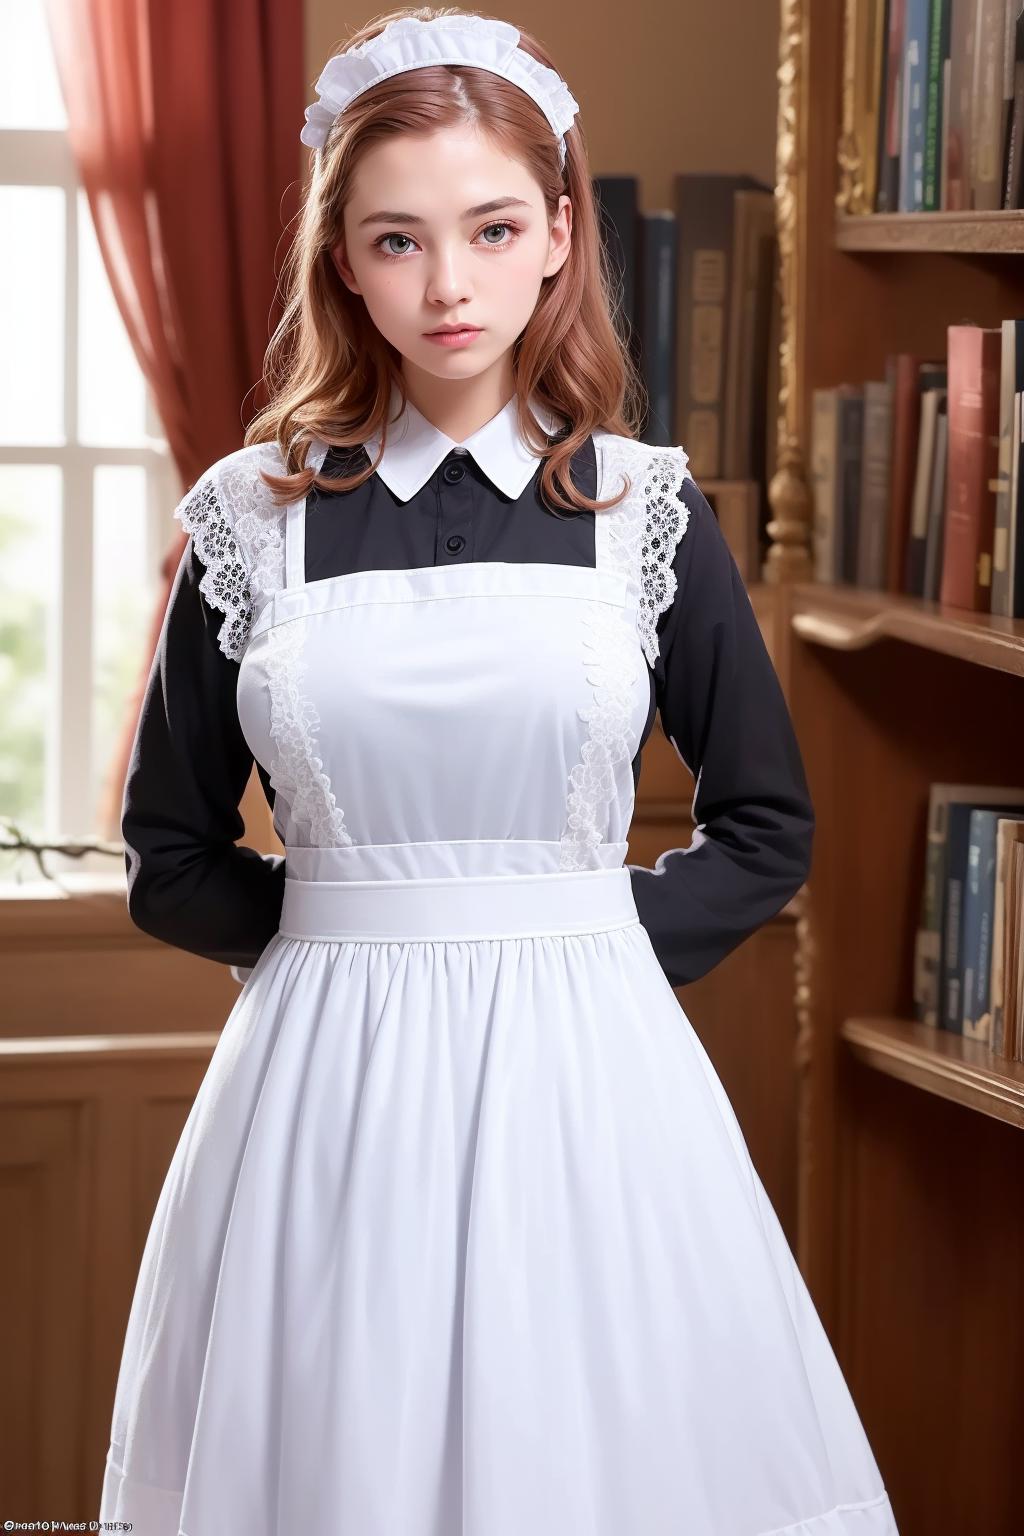 Traditional Maid Dress image by topict